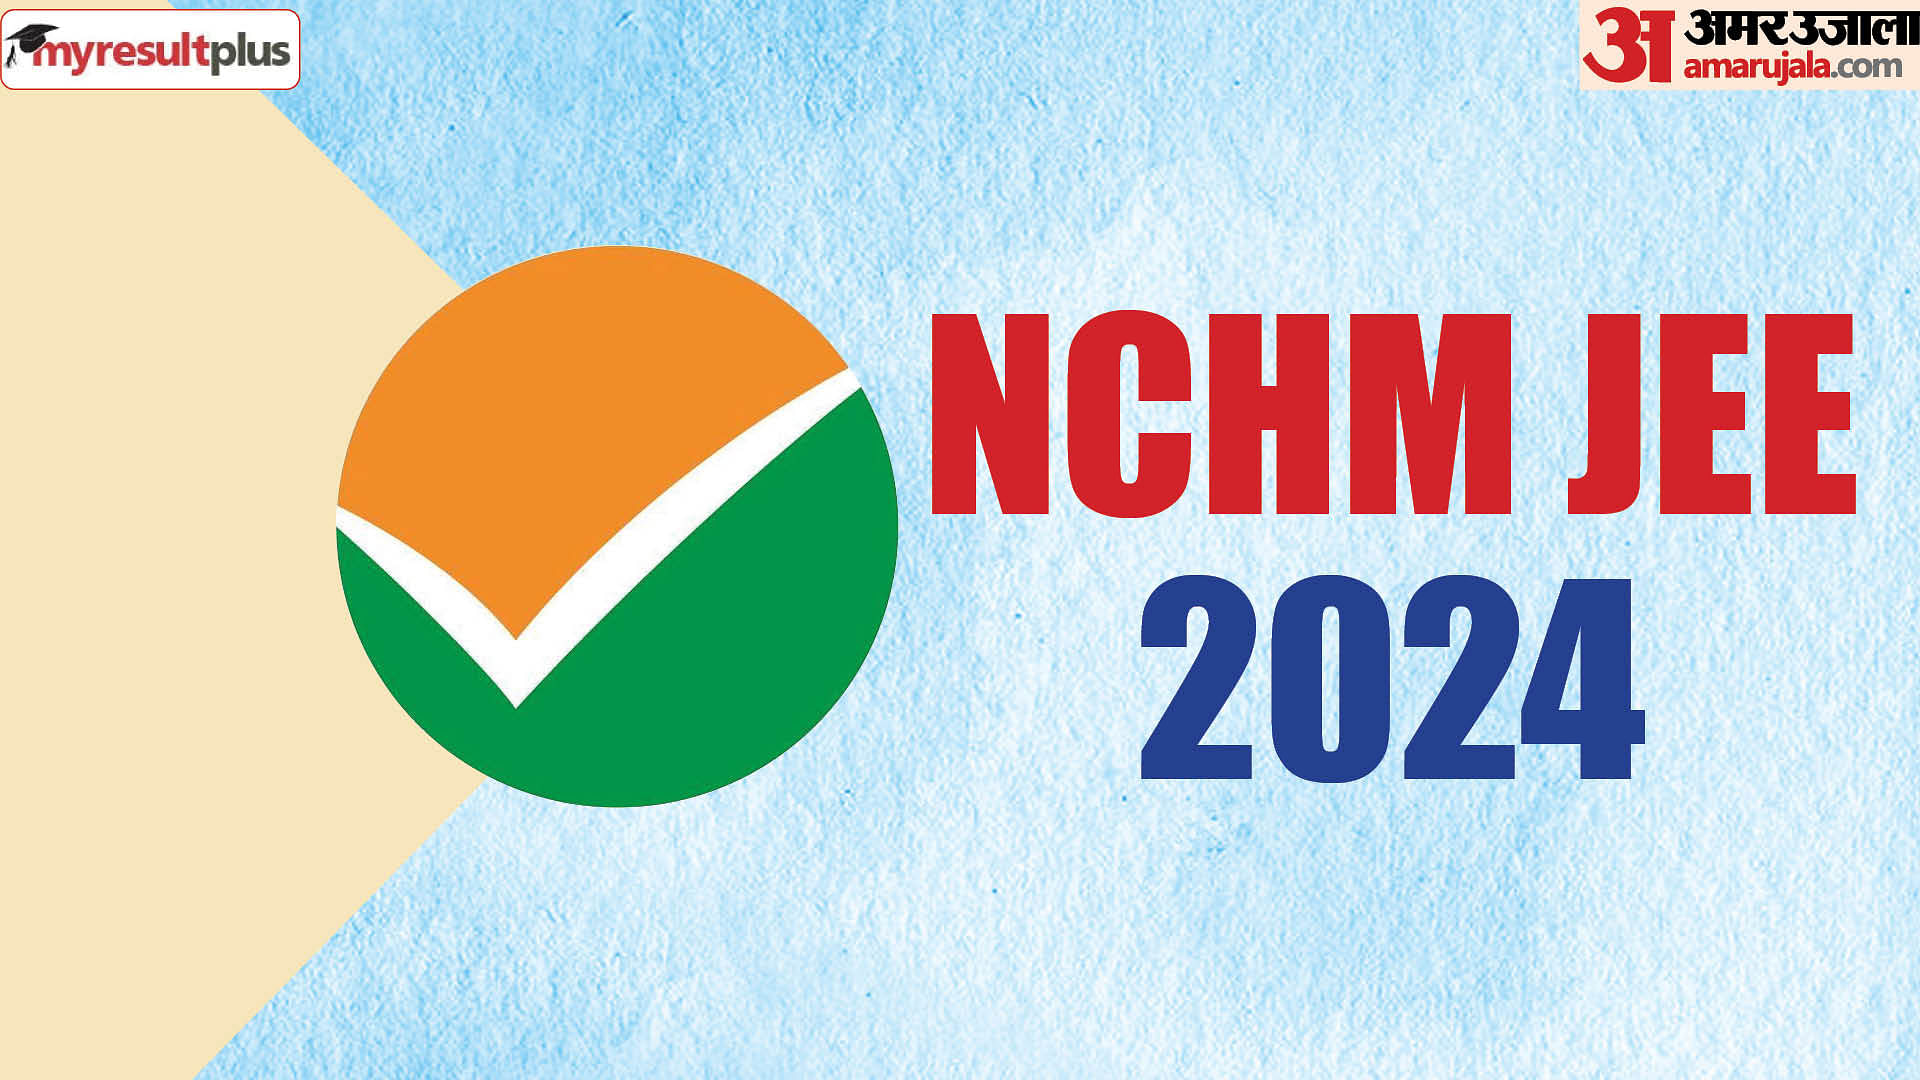 NCHM JEE 2024 admit card released at exams.nta.ac.in/NCHM, Read the important instructions here